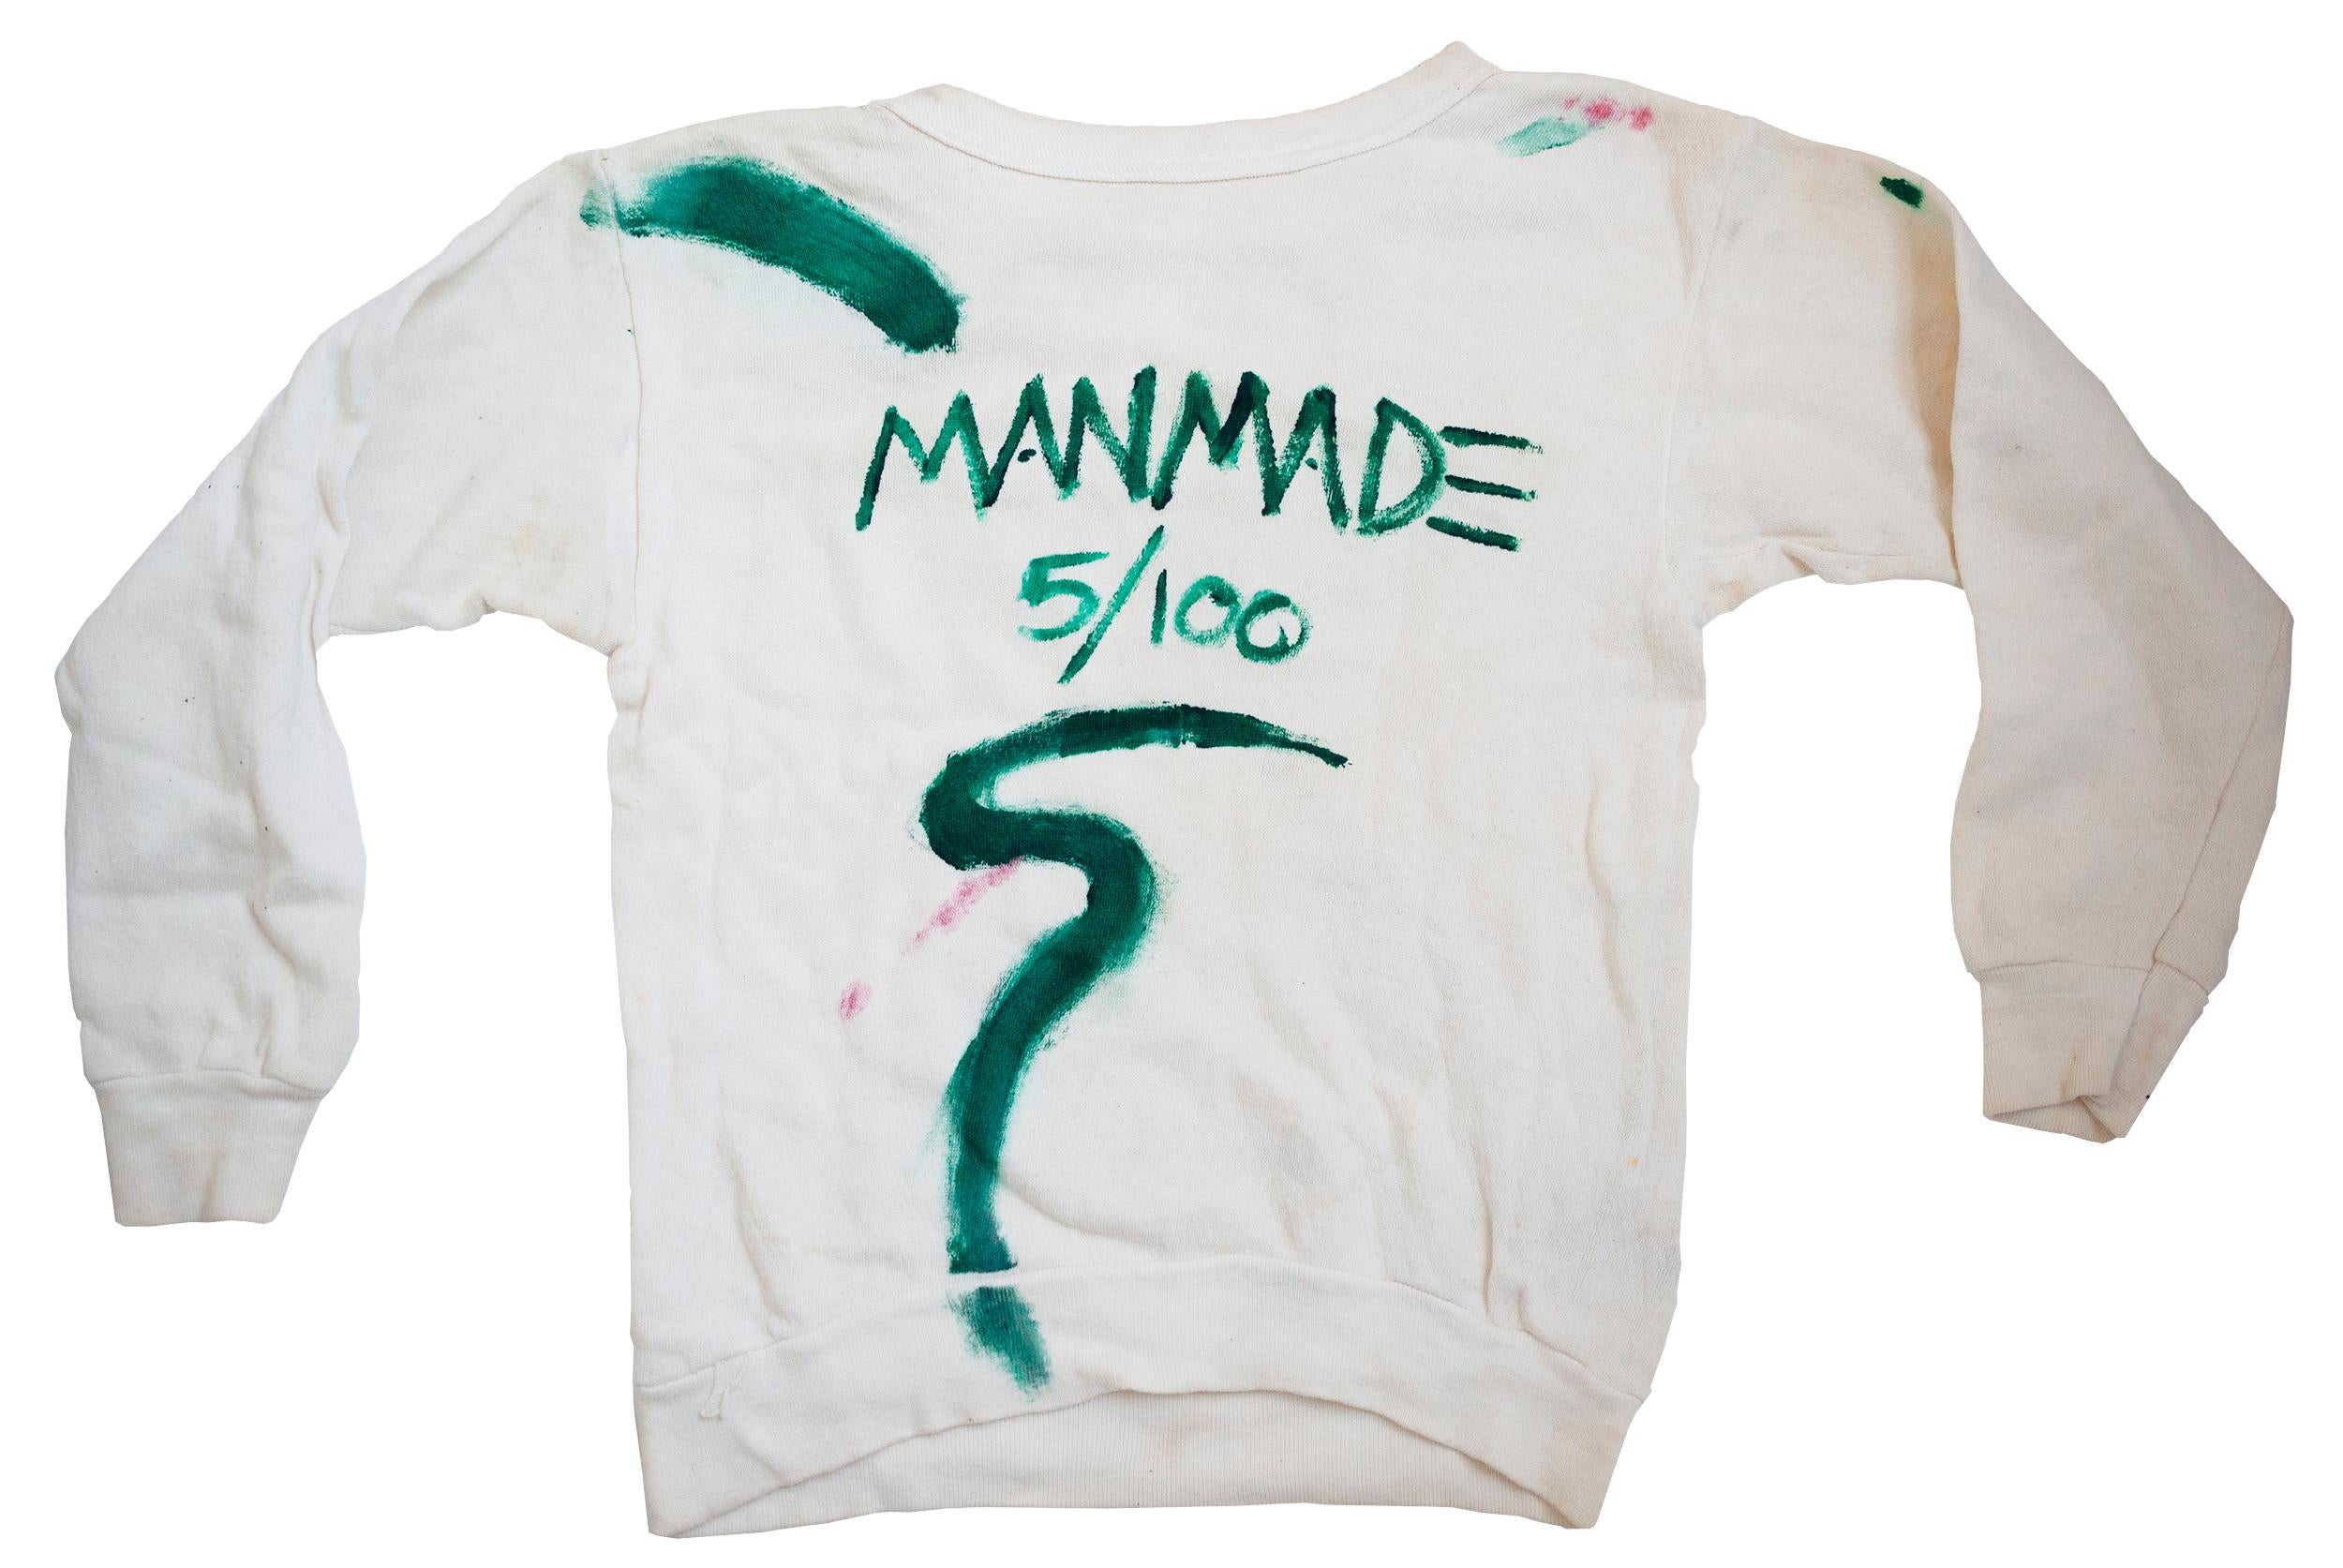 Jean-Michel Basquiat (untitled), 'MAN MADE Sweatshirt', c. 1979:
Basquiat produced this rare original hand-painted sweatshirt (among others, with only few known to have survived) for the purposes of selling these on his own and through the historic